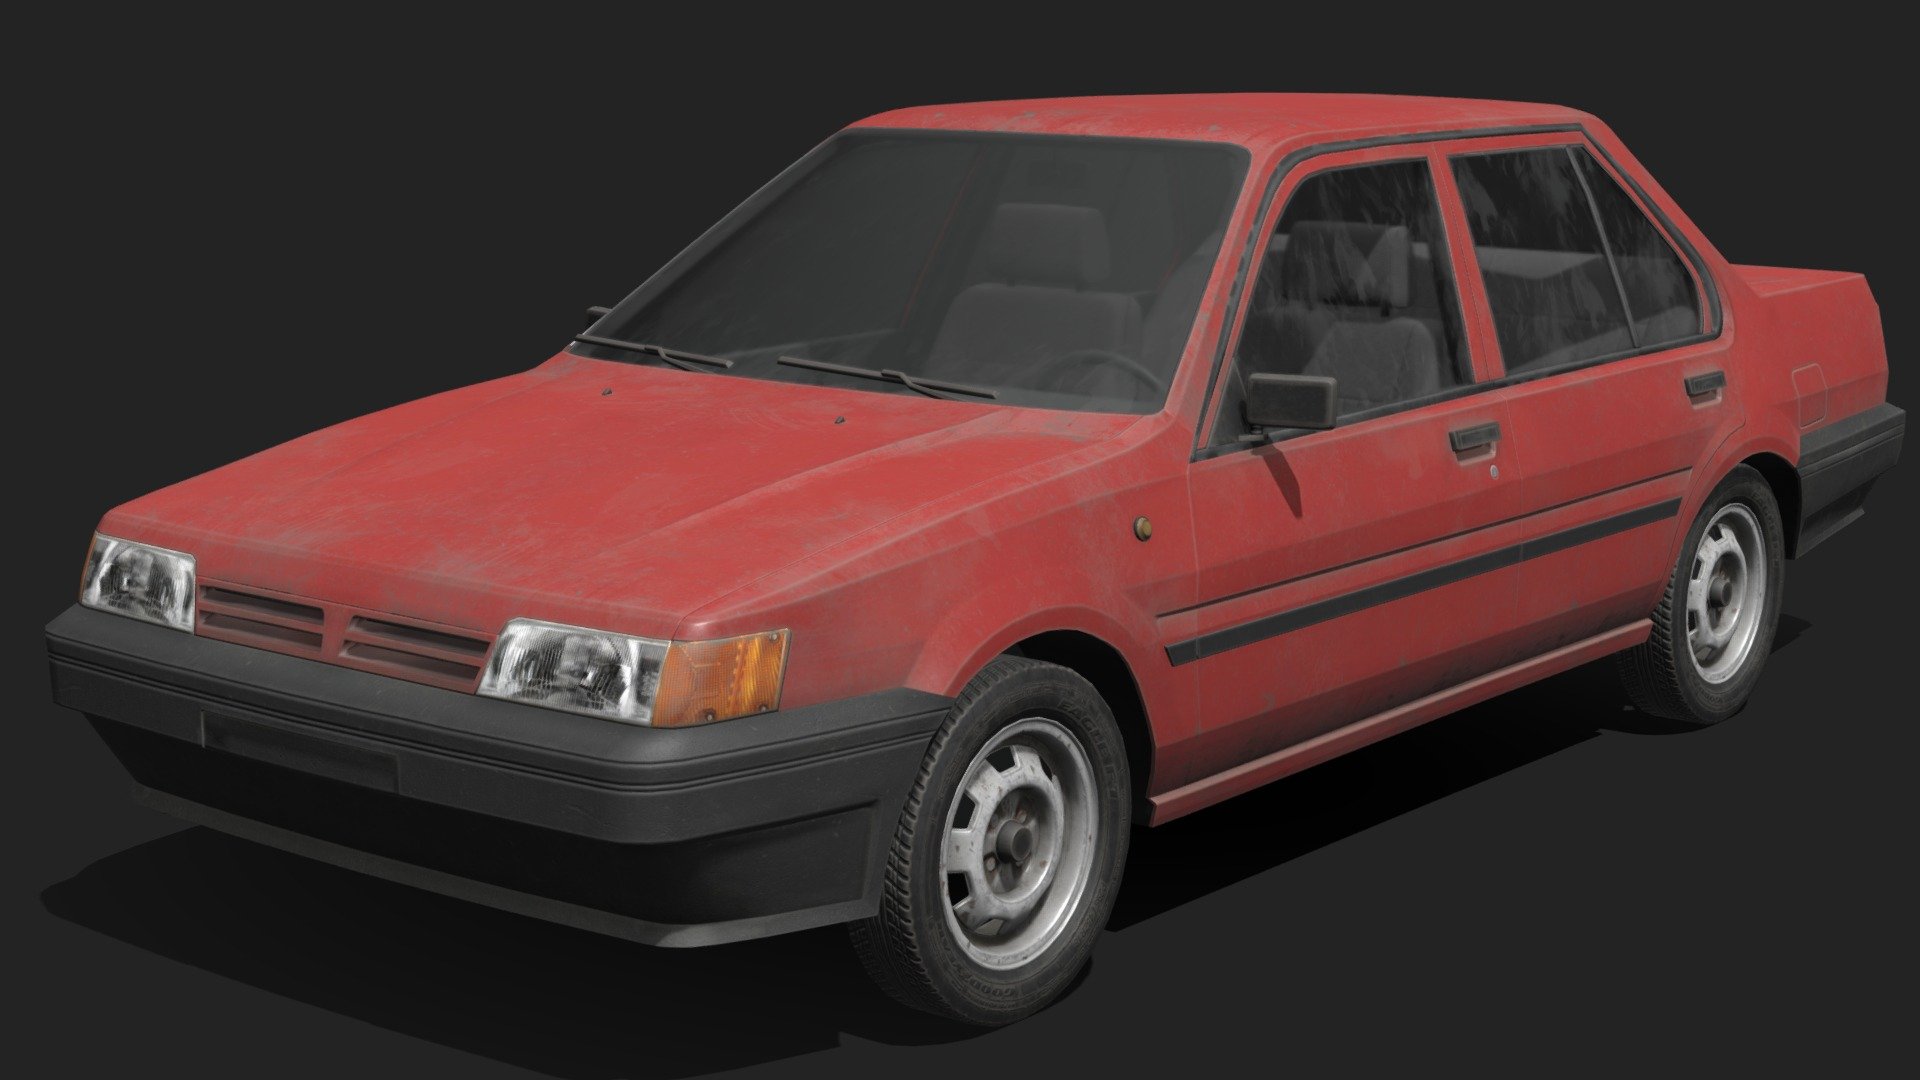 3D low poly model of a European car made specifically for the Road To Vostok project - Nissan - Sunny N13 - 3D model by sMoKi (@SevKa) 3d model